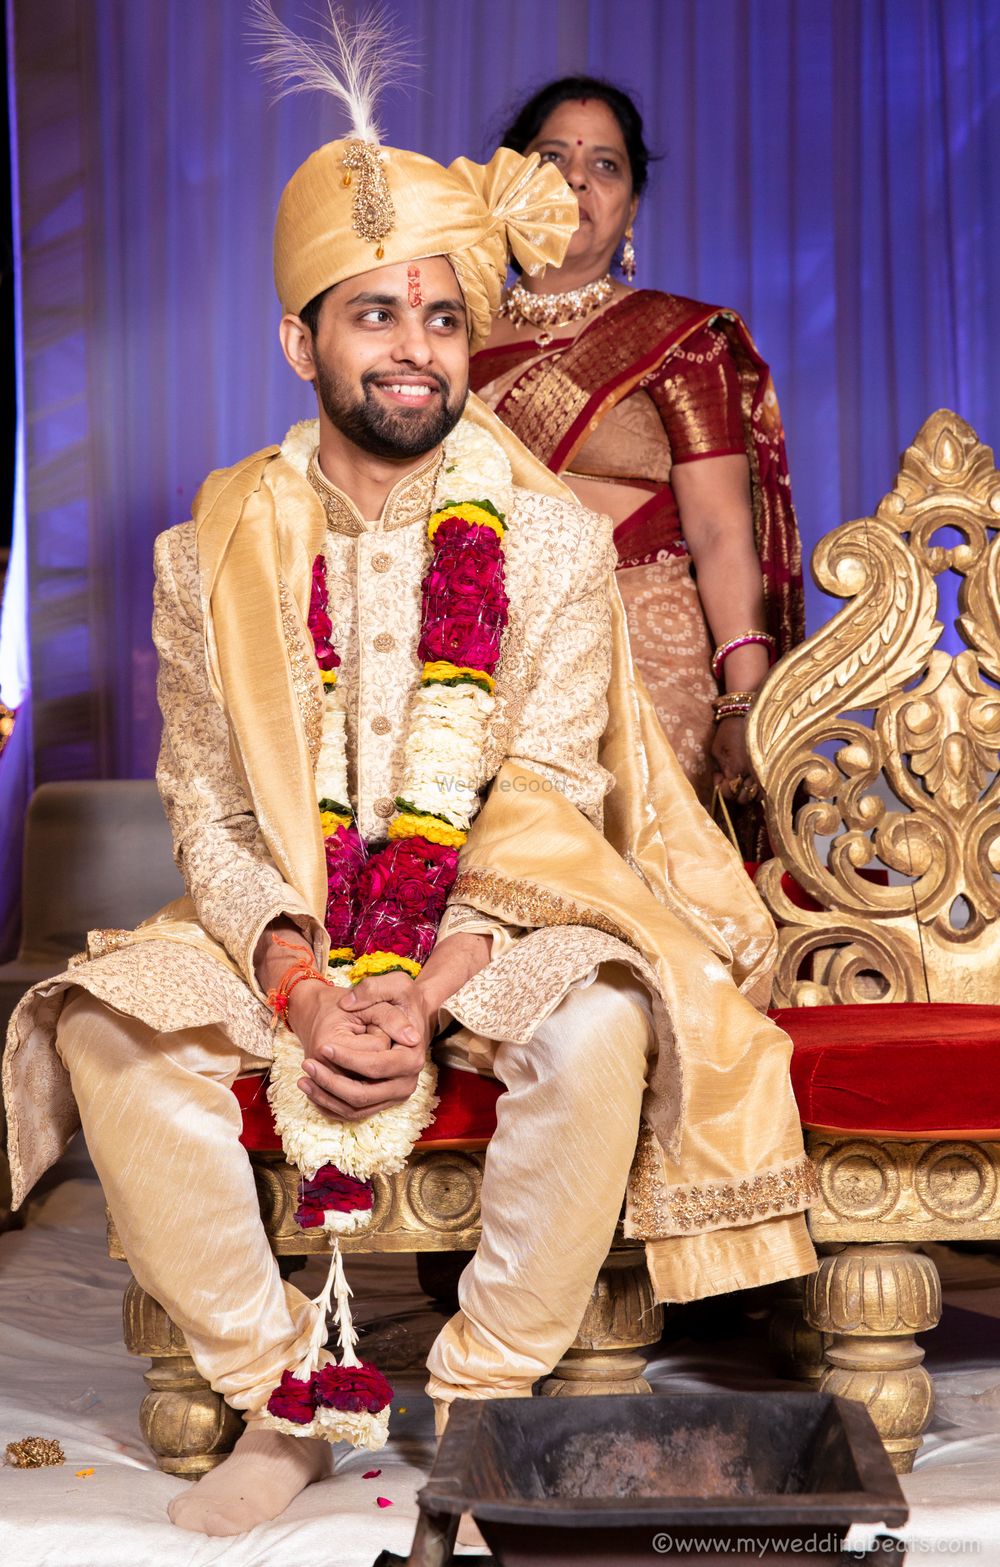 Photo From Dhruv + Surbhi - By My Wedding Beats